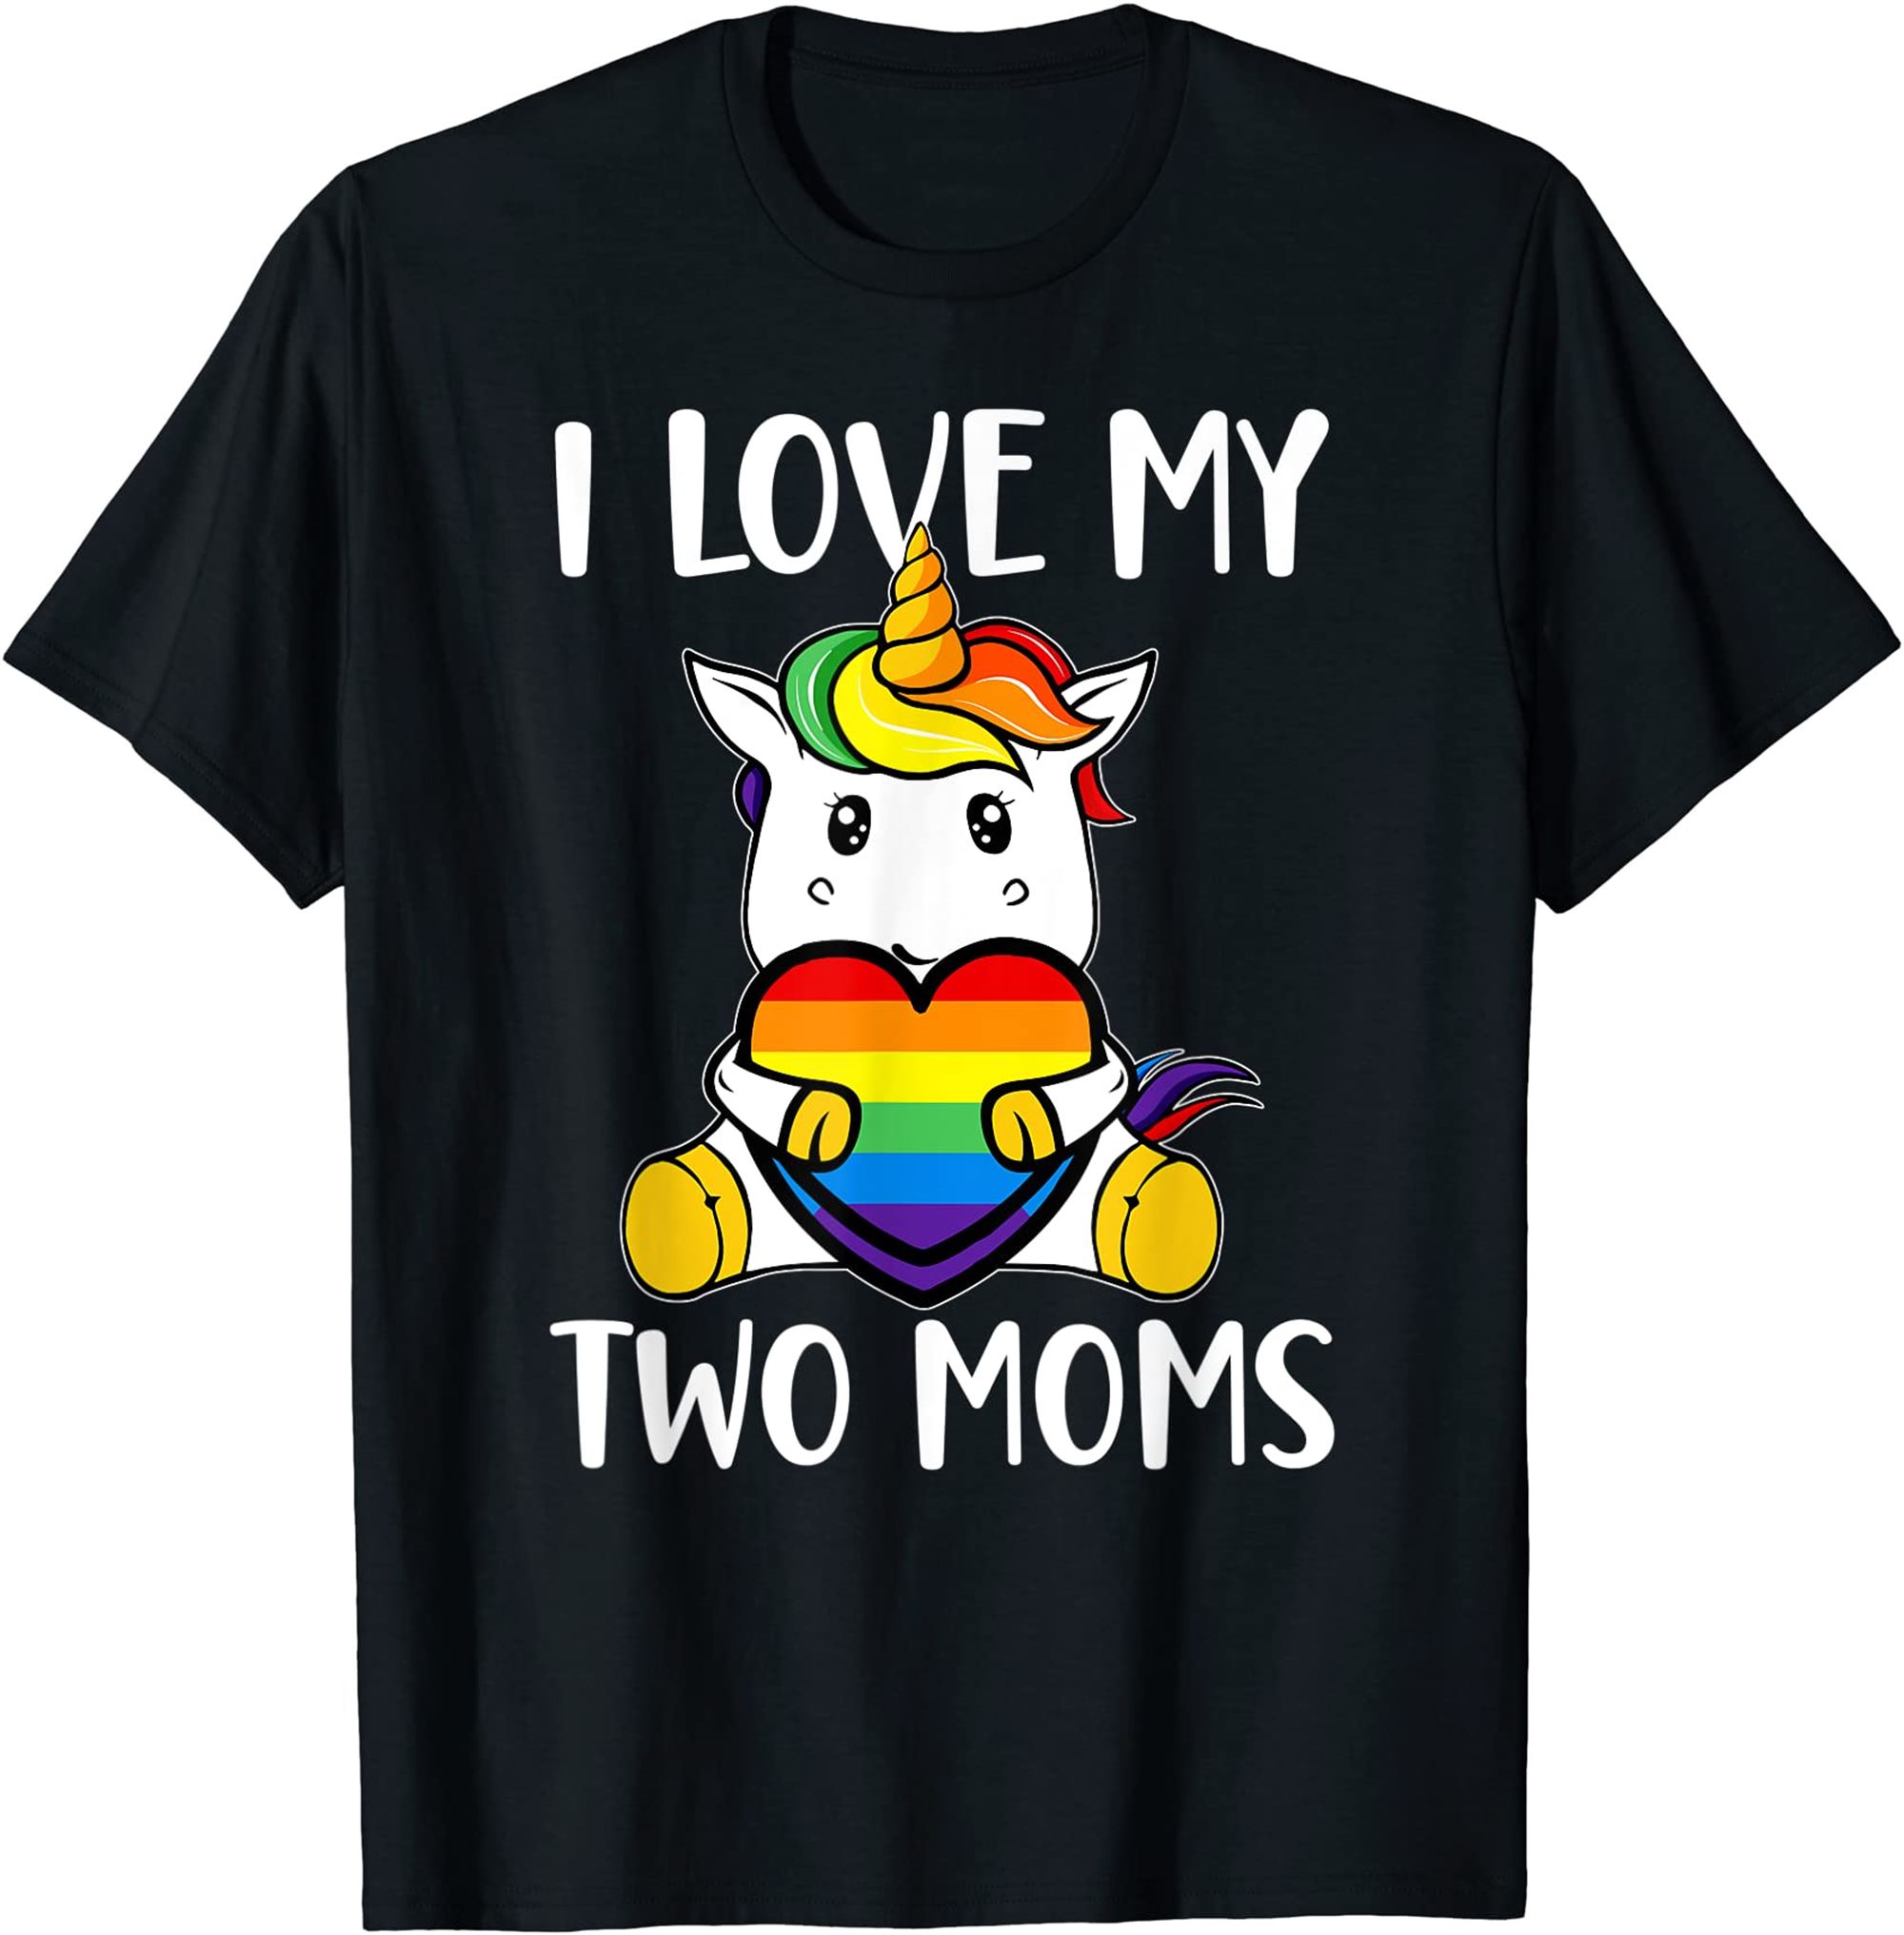 I Love My Two Moms Cute Lgbt Gay Ally Unicorn Girls Kids T-shirt Size Up To 5xl